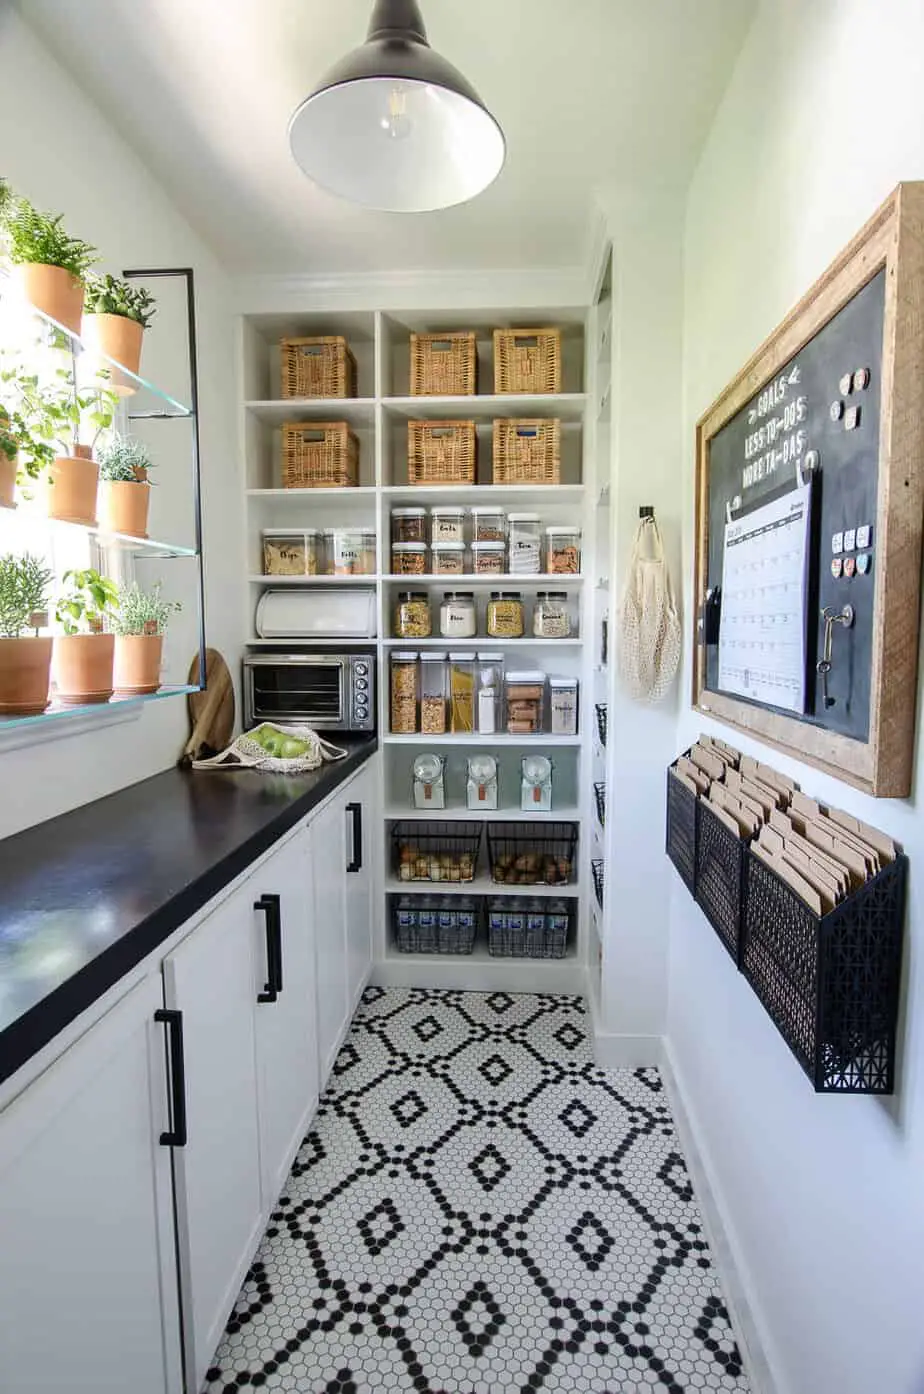 https://www.simplicityinthesouth.com/wp-content/uploads/2019/05/narrow-walk-in-pantry-design-with-countertop-and-shelving.jpg